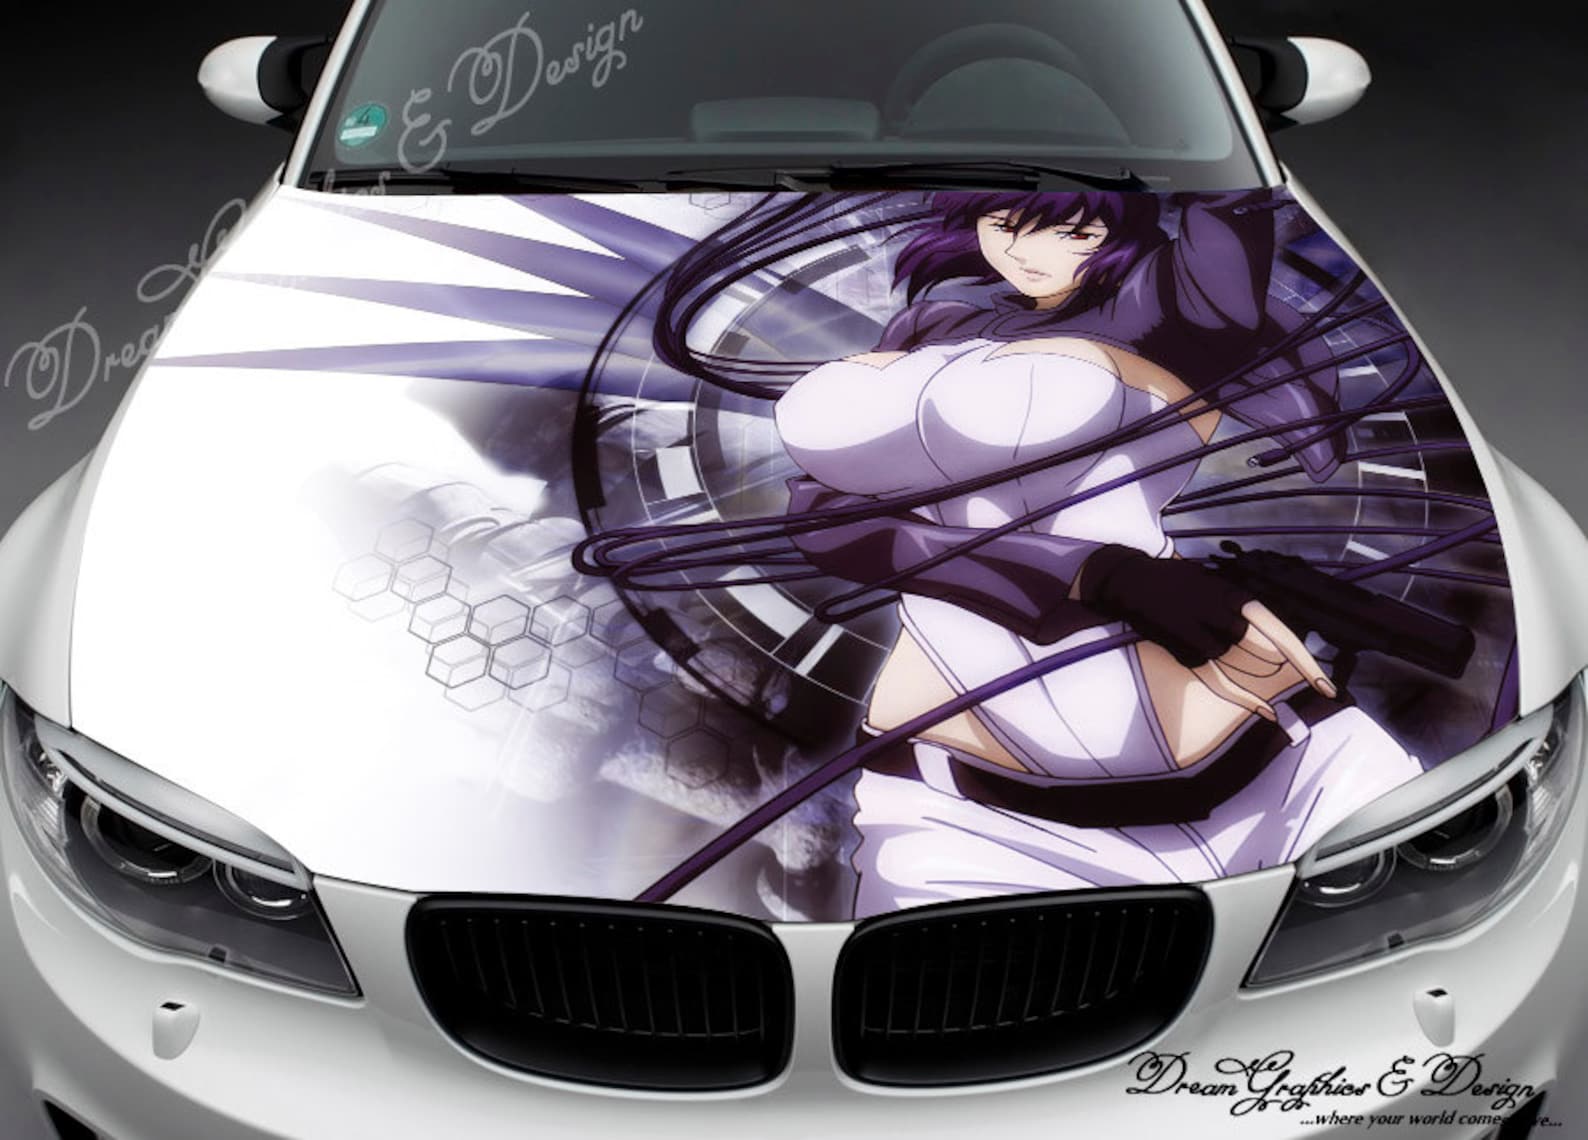 Car hood decal vinyl sticker graphic wrap decal truck image 1.